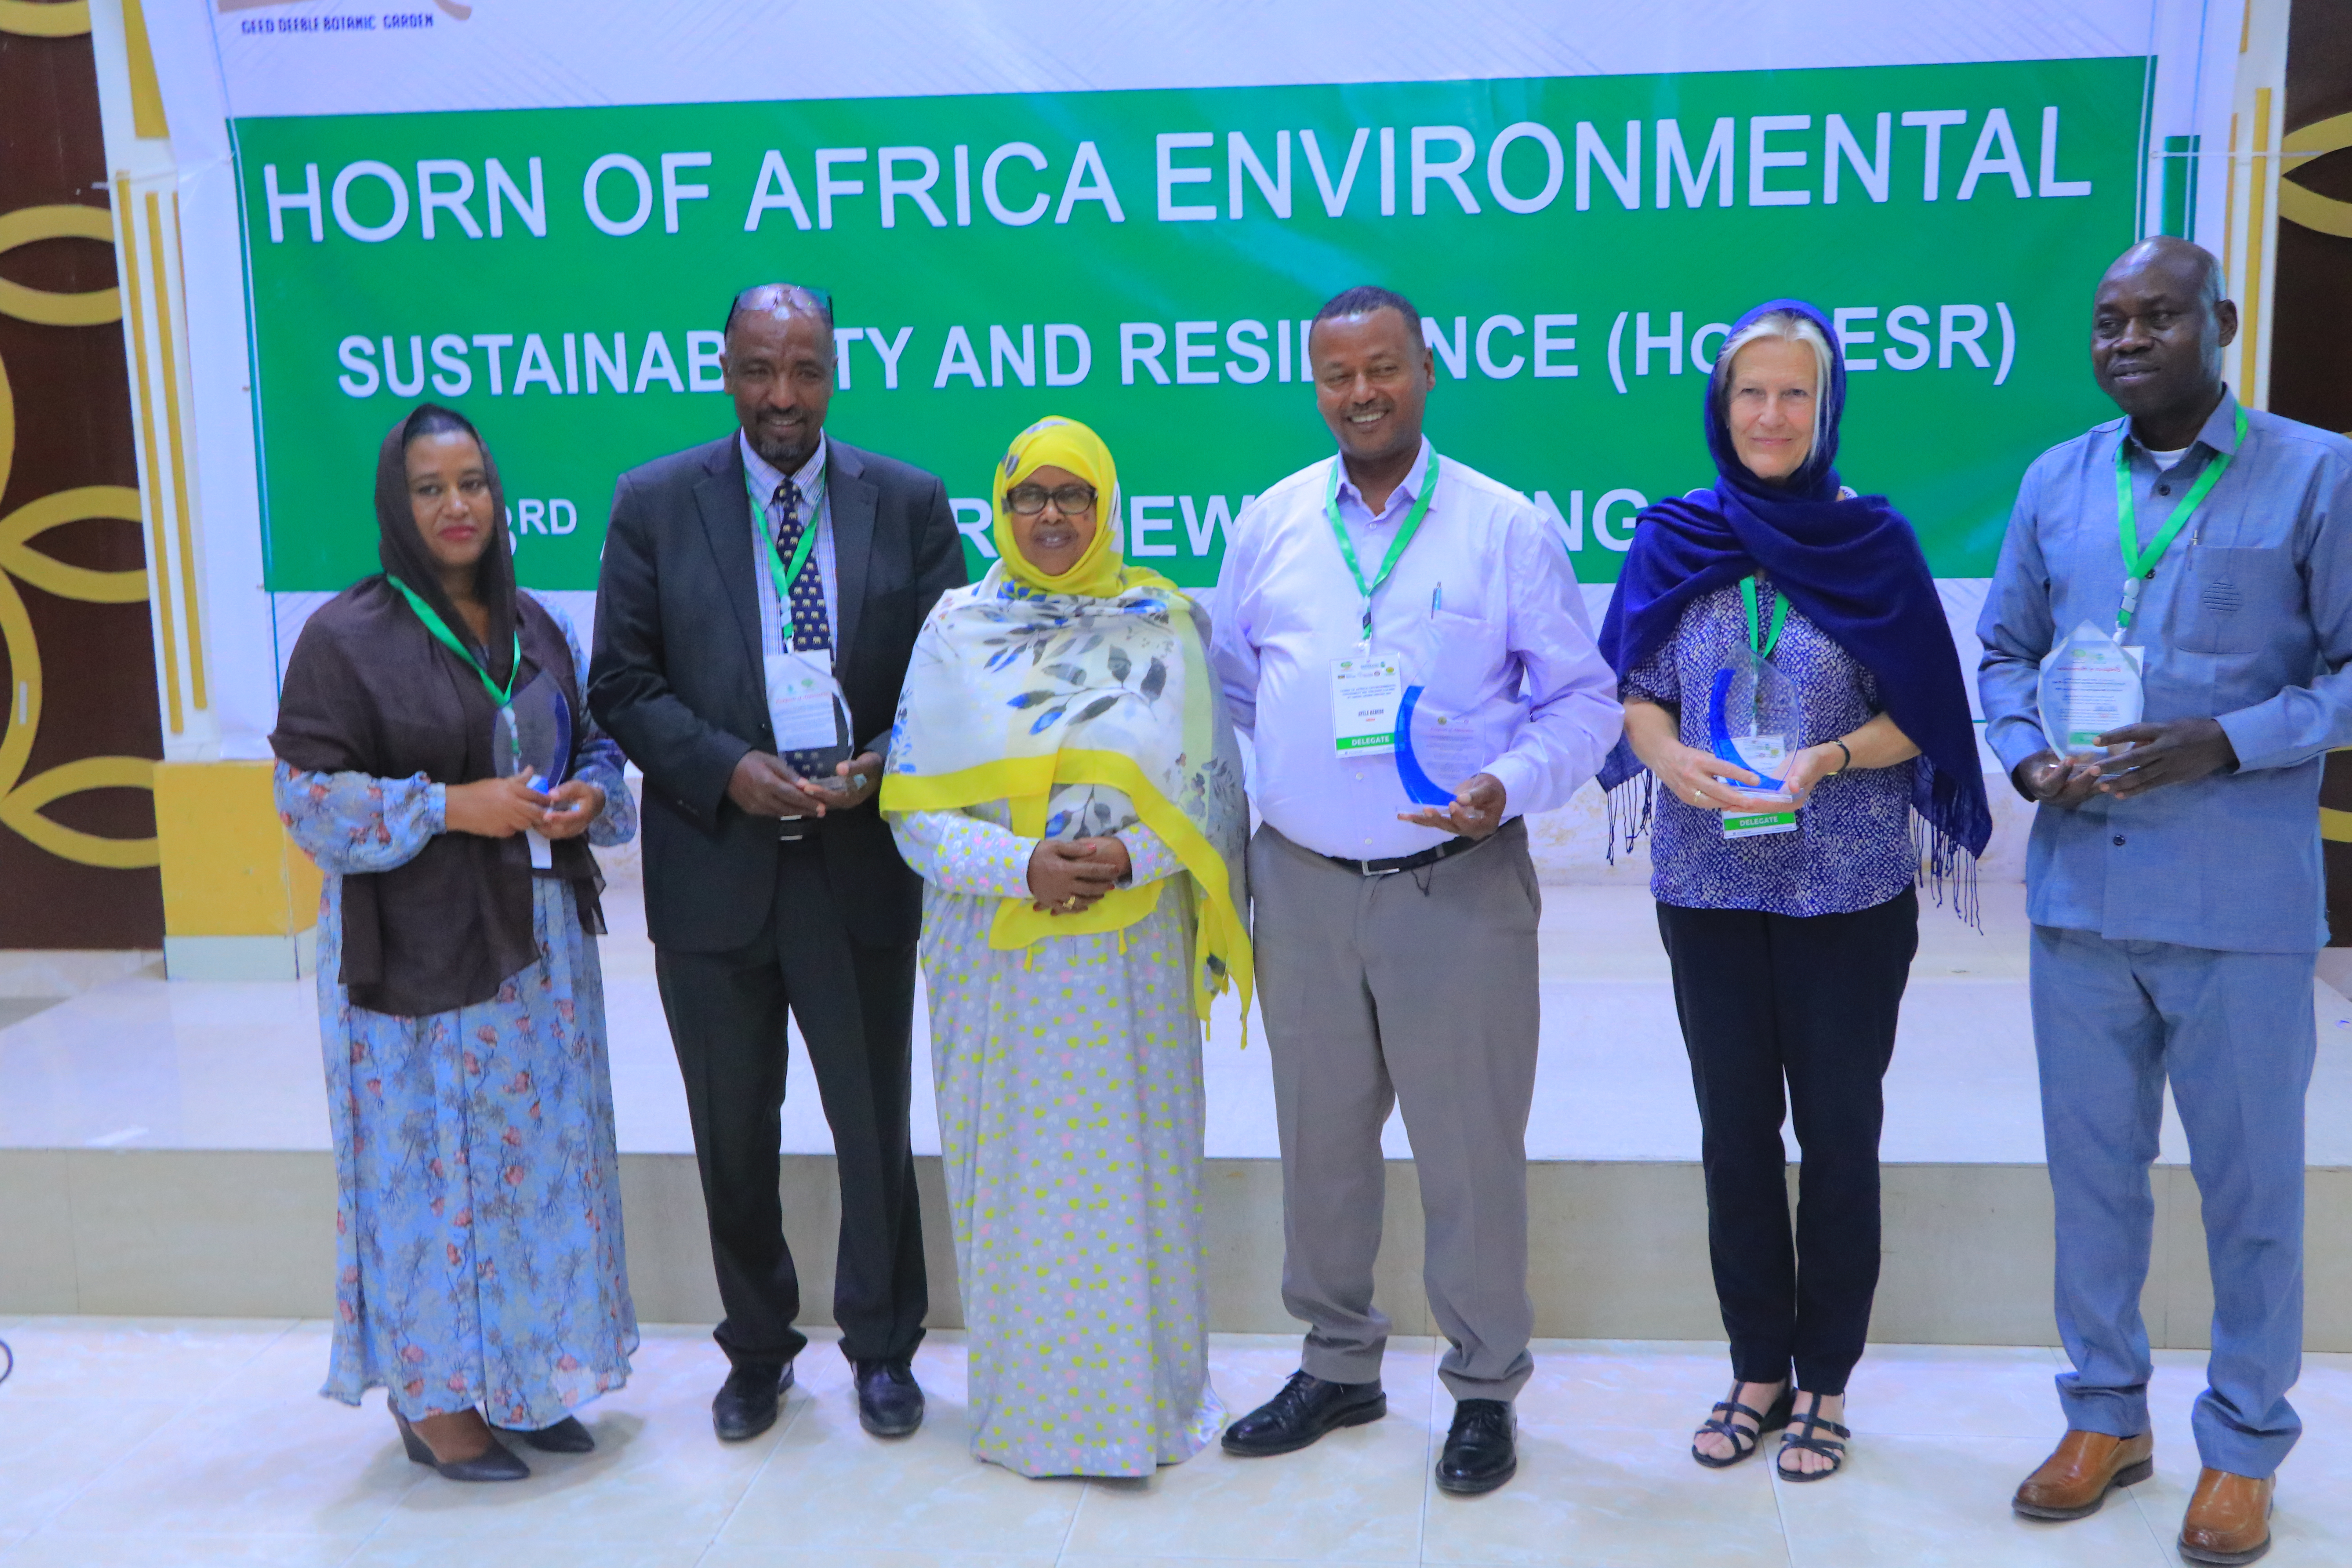 HoA-REC&N and Partners organized the third Annual Review Meeting to reflect on the achievements of the Horn of Africa Environmental Sustainability and Resilience regional initiative.